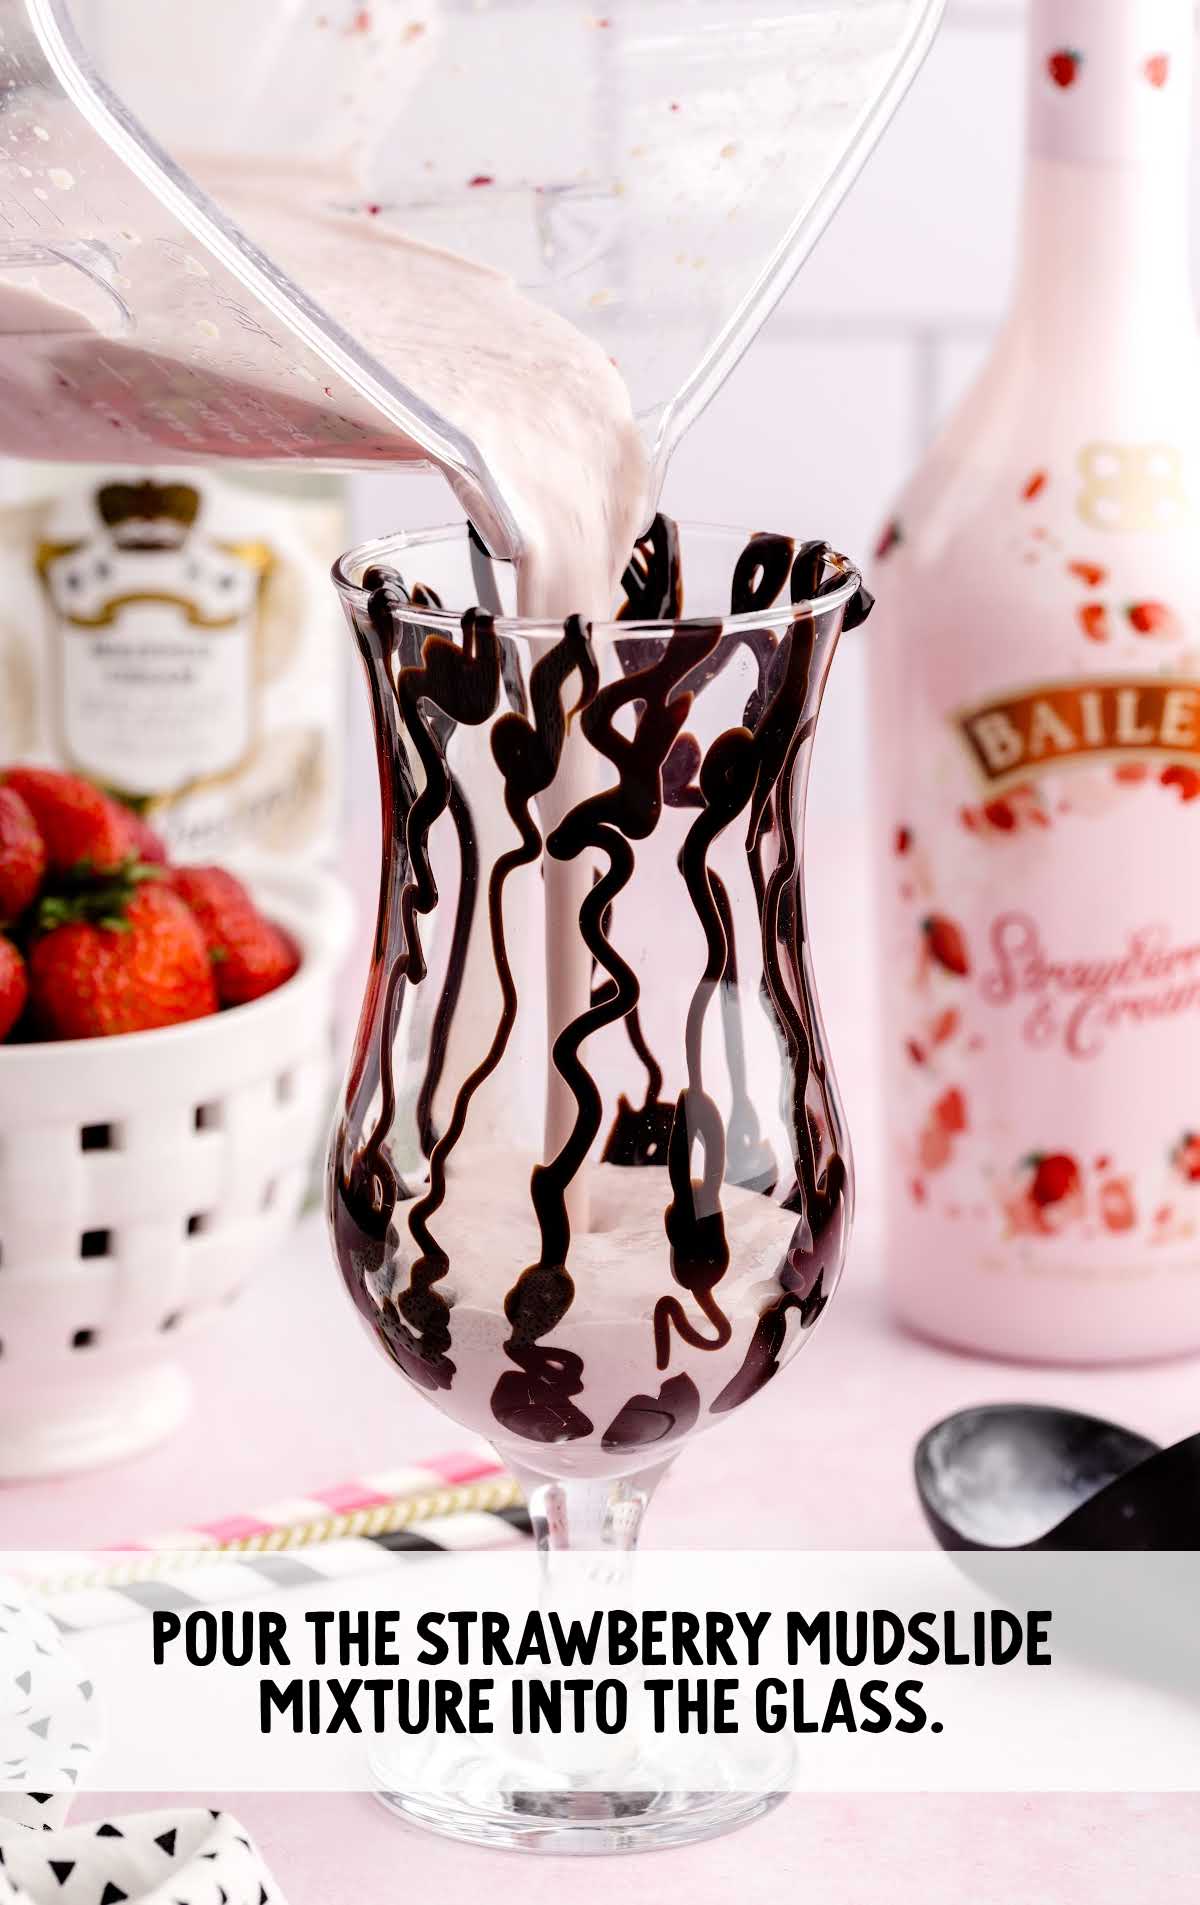 Strawberry Mudslide poured into the glass